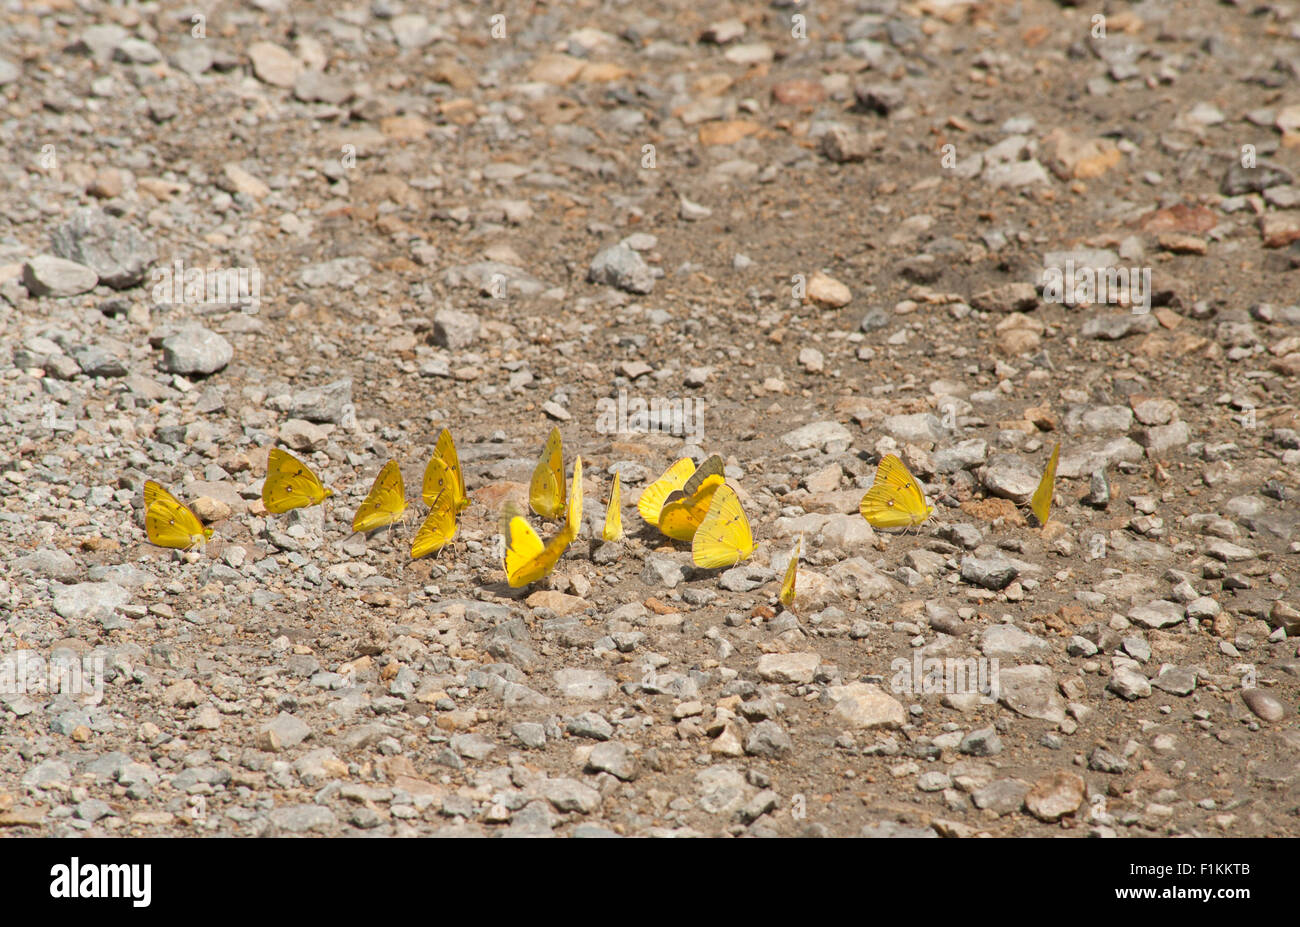 Mud-puddling (puddling) 'Little Yellow Sulphur'  butterflies searching for water on damp road during a drought in Indiana. Stock Photo